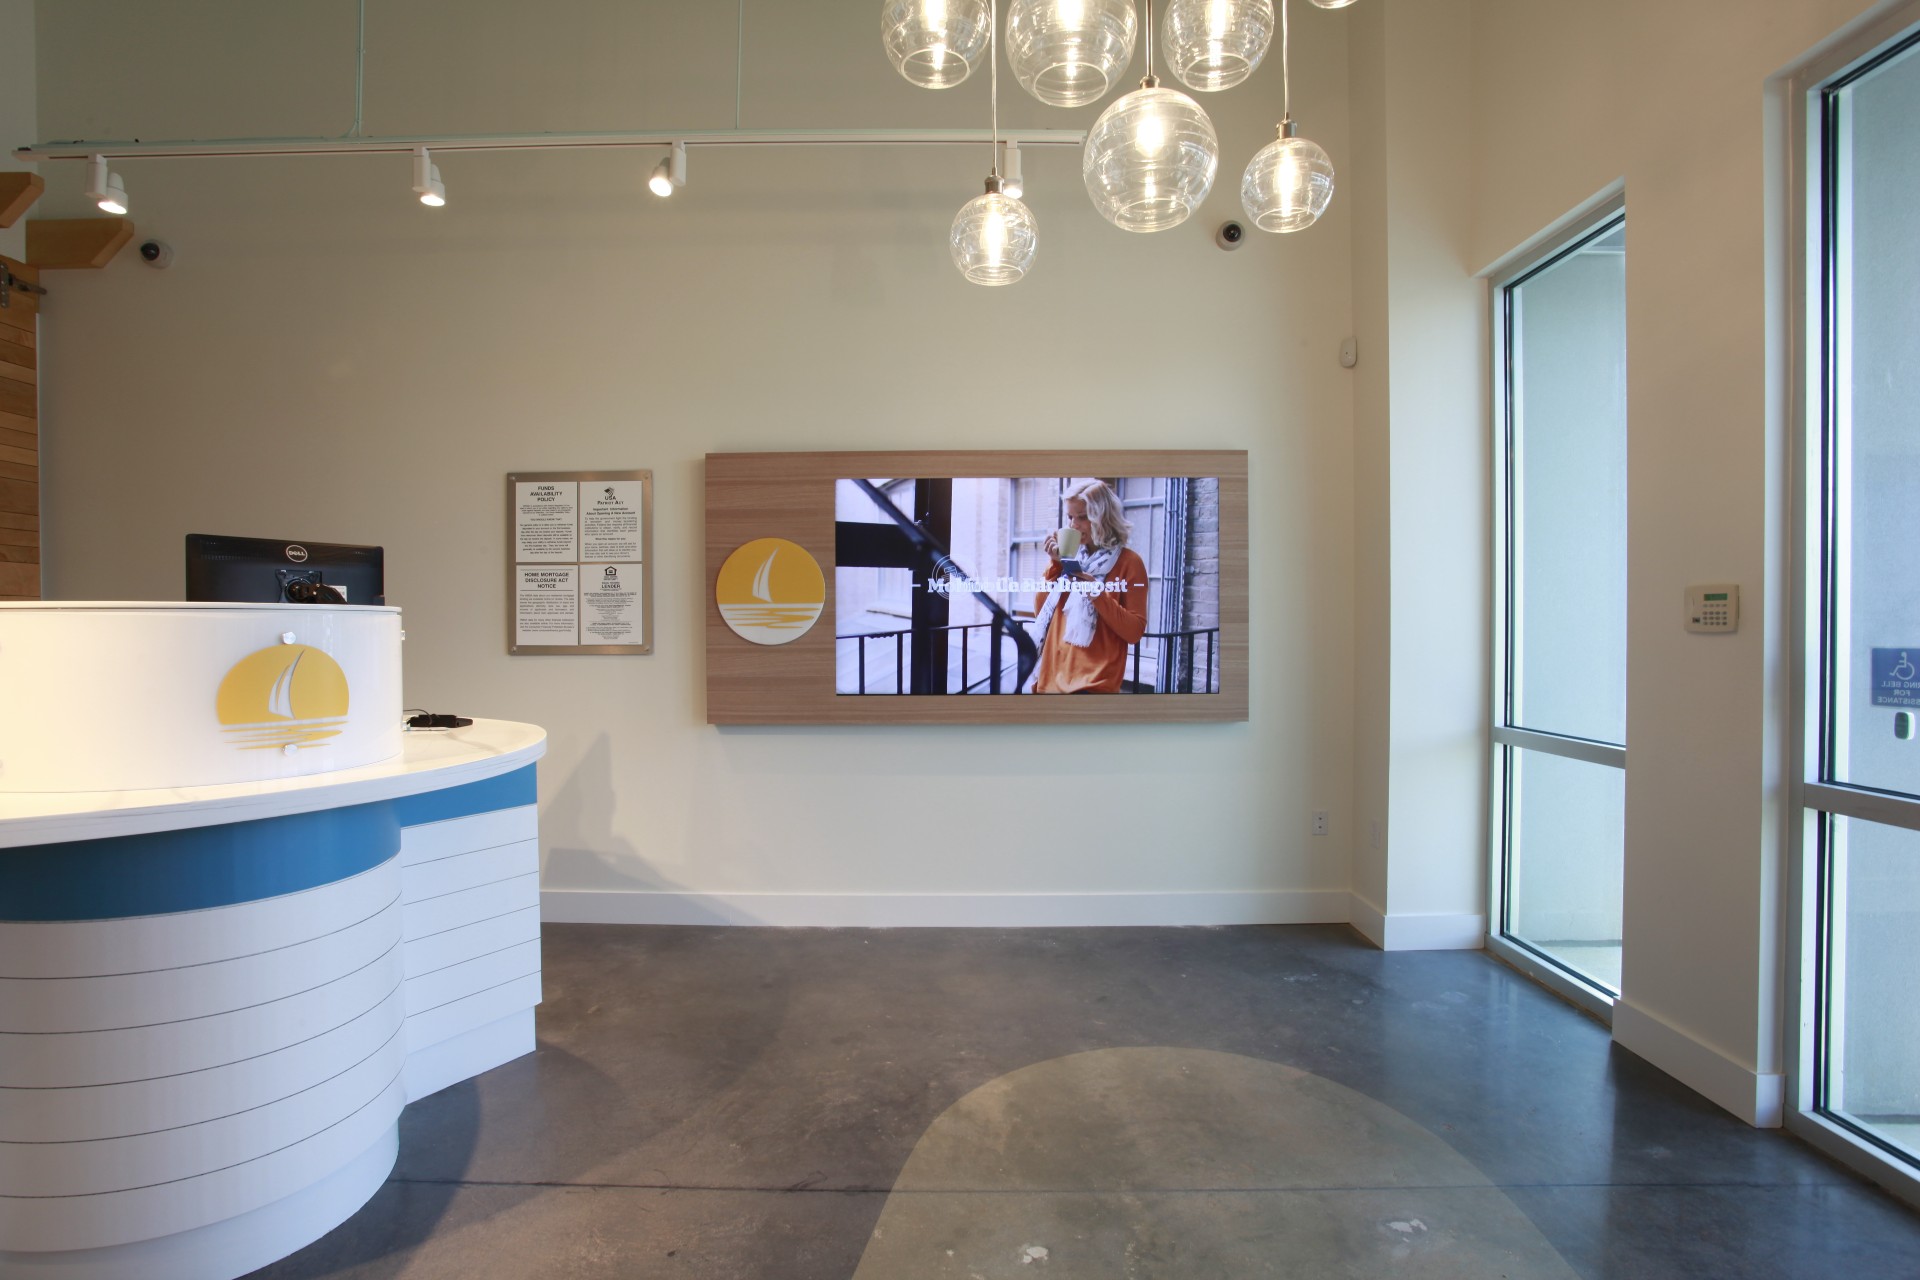 The Teller Pod and one wall of the New Horizons lobby. The Teller Pod is white with a light blue horizontal stripe and a yellow logo of a sailboat on the front. The wall is white and features a recessed video screen set into a panel of light blond wood. A chandelier made of clear glass globes hangs from the ceiling.